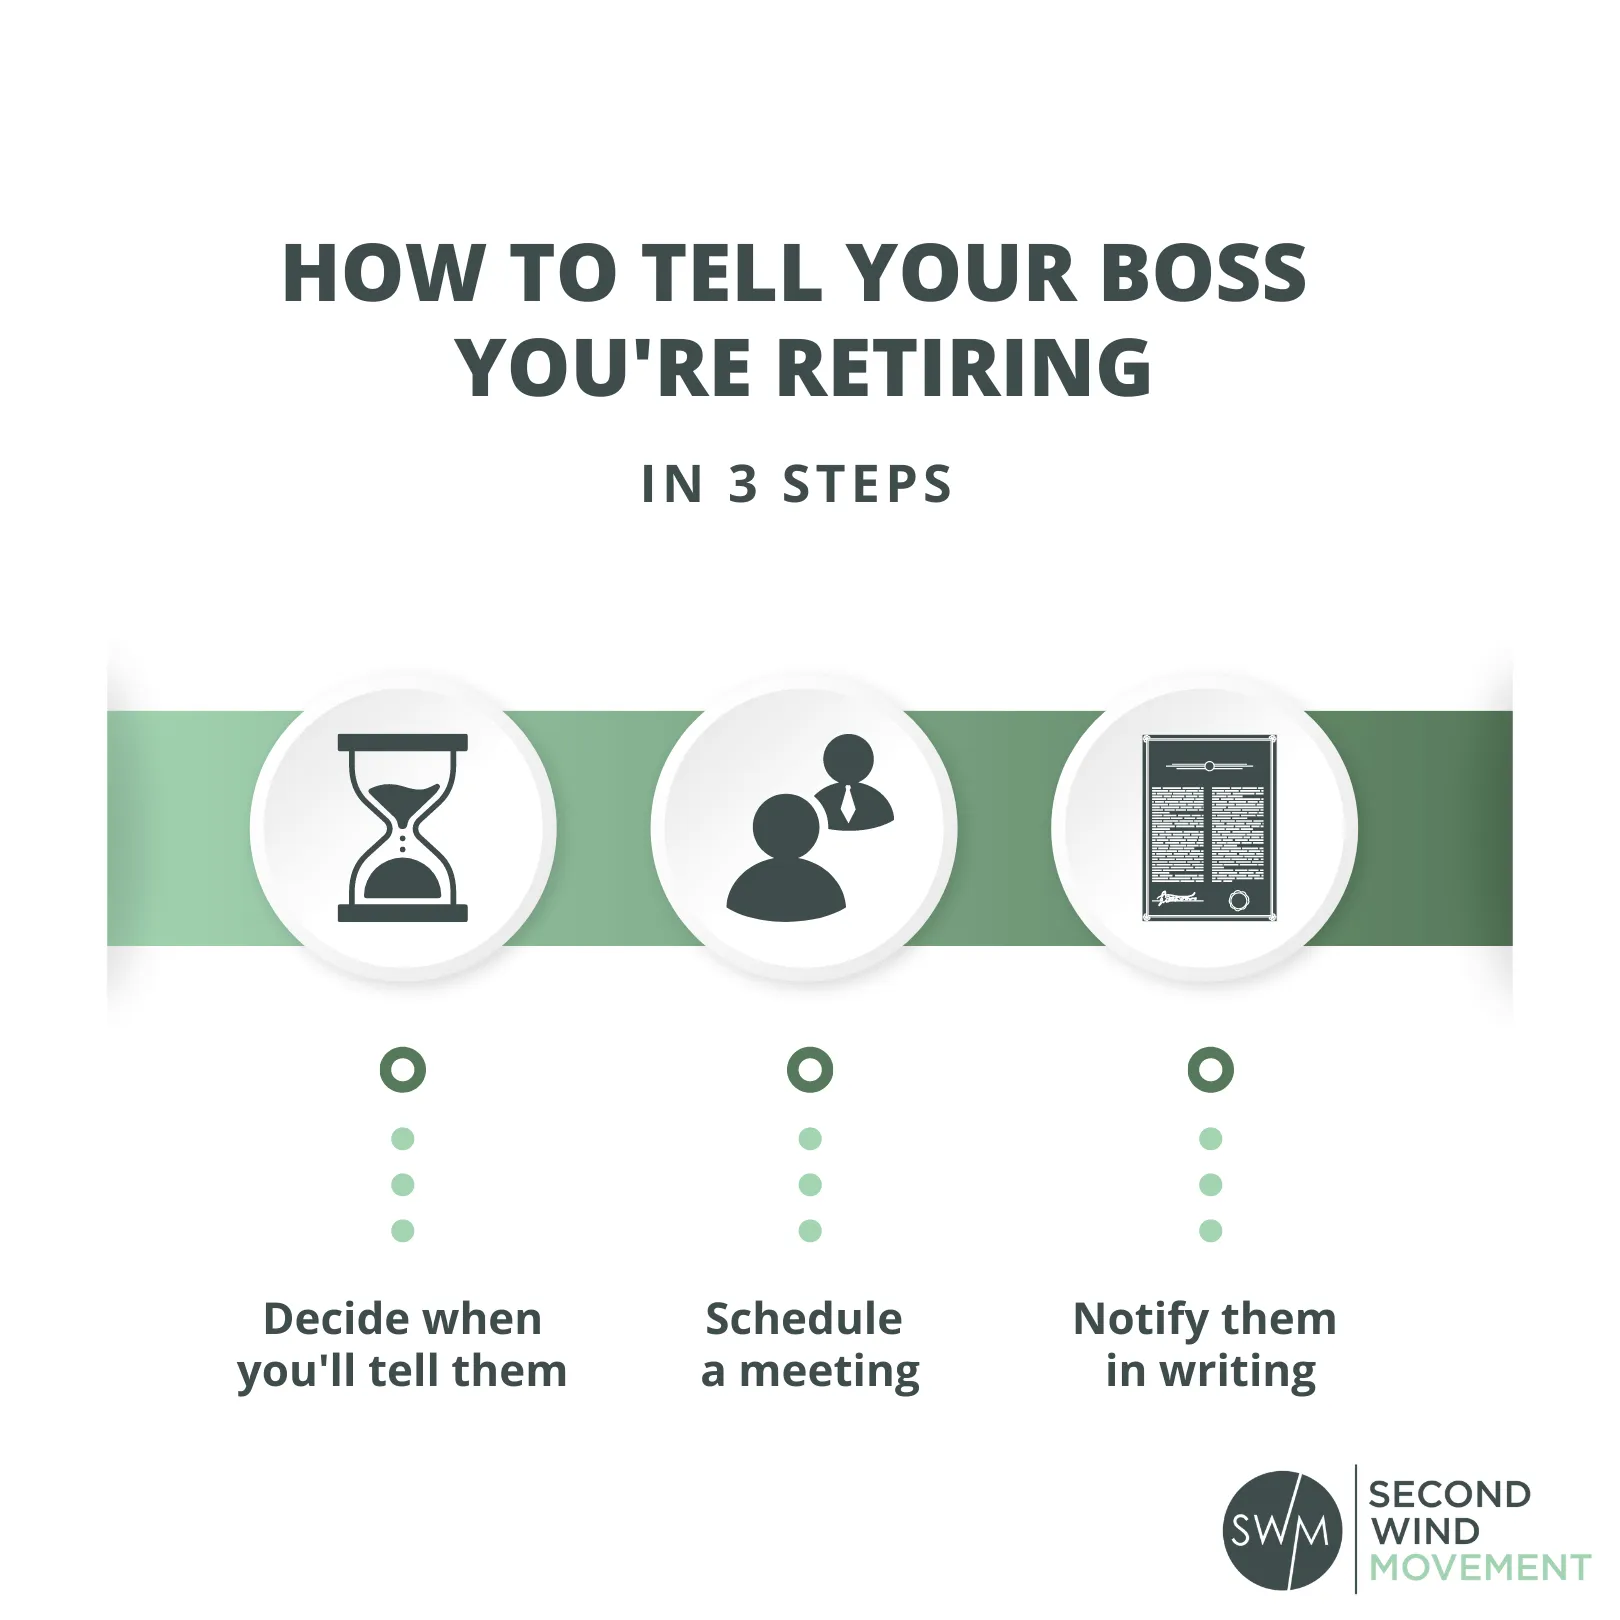 how to gracefully tell your boss you're retiring: decide when you'll tell them, schedule a meeting, and notify them in writing